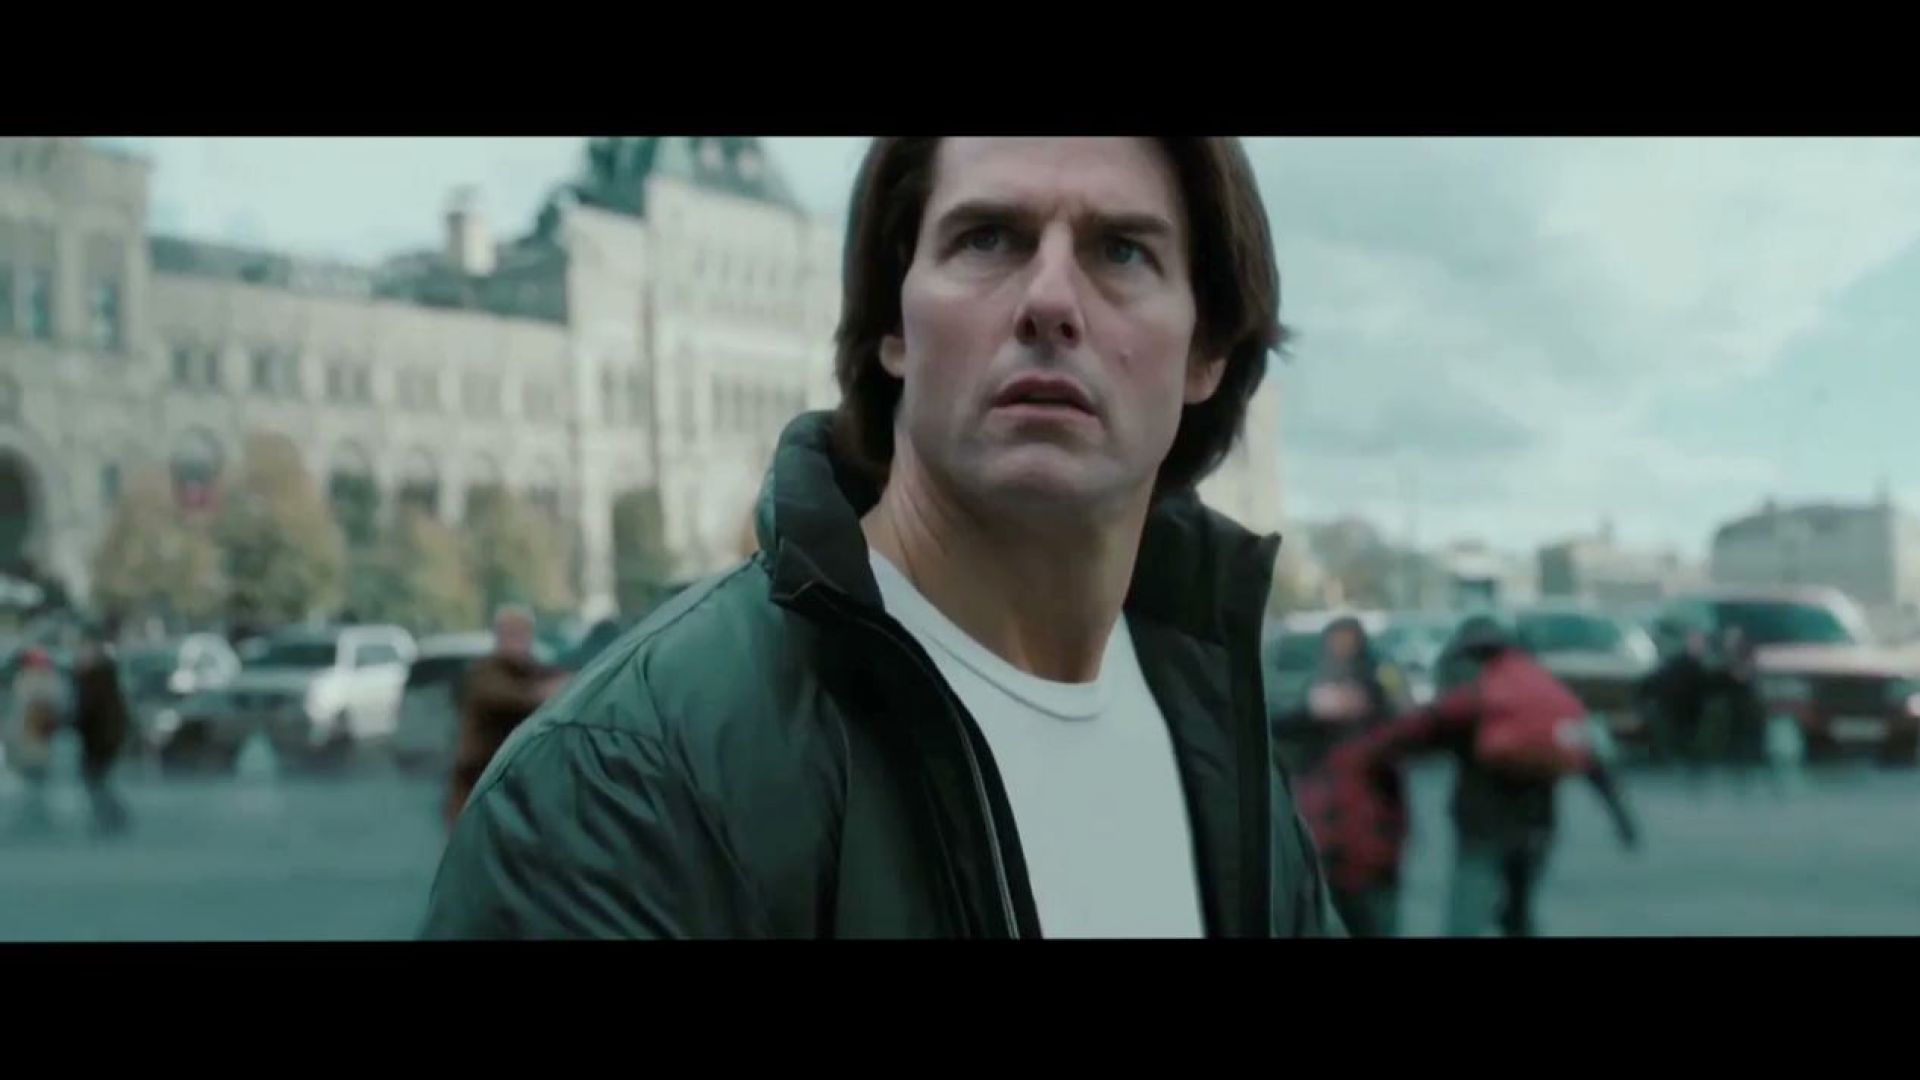 The Russians are classifying this as an undeclared act of war. Mission: Impossible - Ghost Protocol